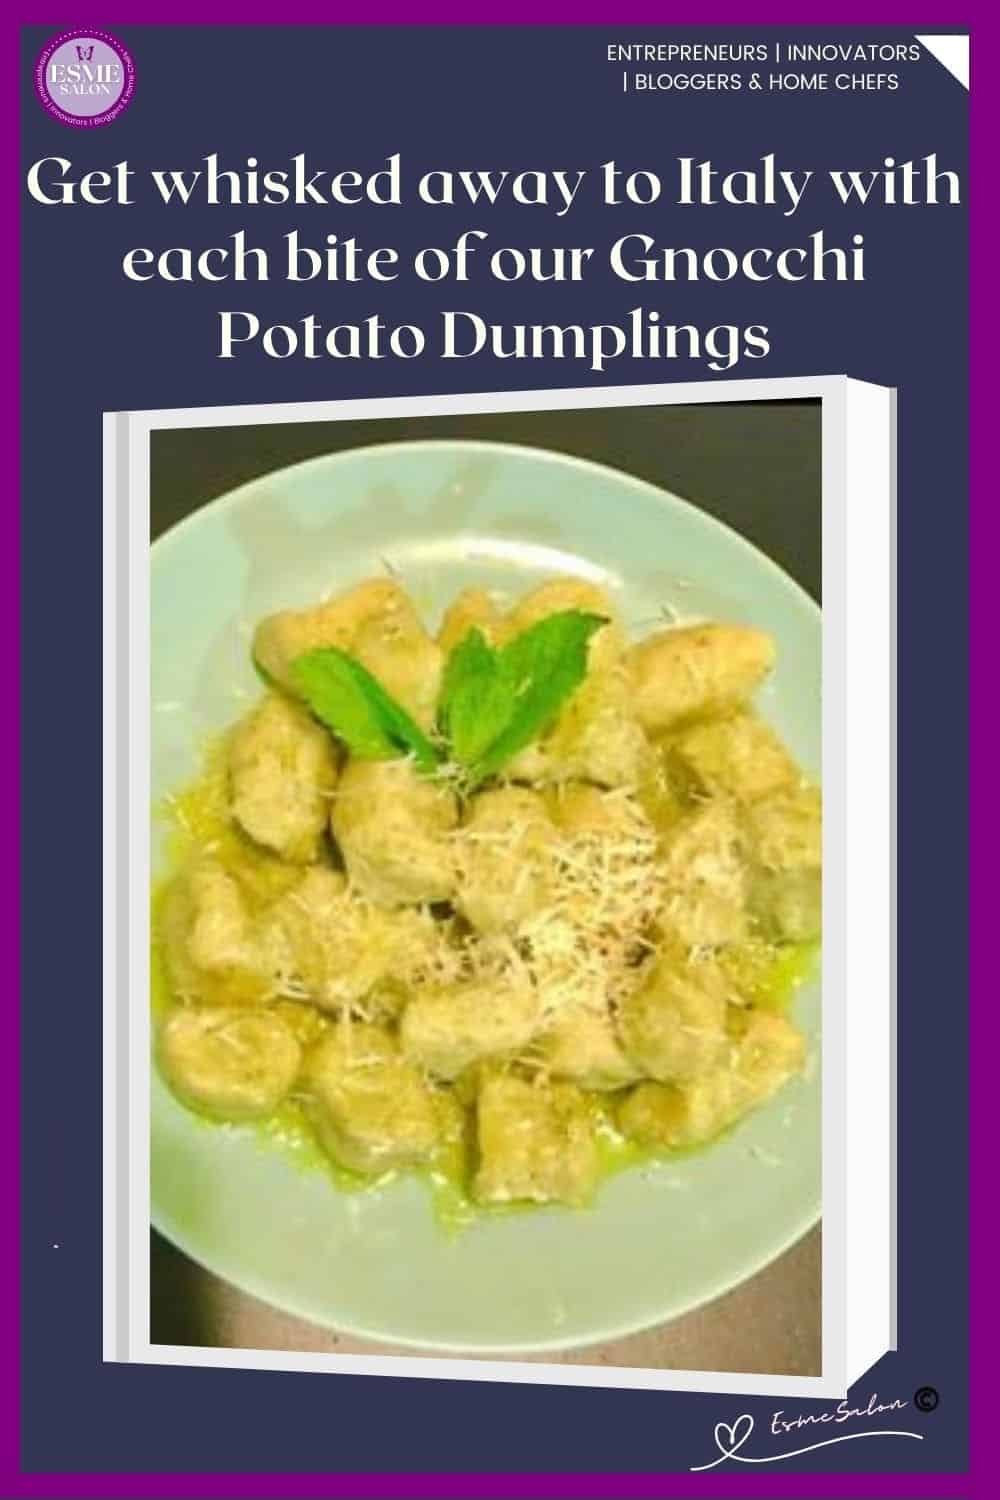 an image of Gnocchi Potato Dumplings on a green round plate with pesto and freshly grated parmesan